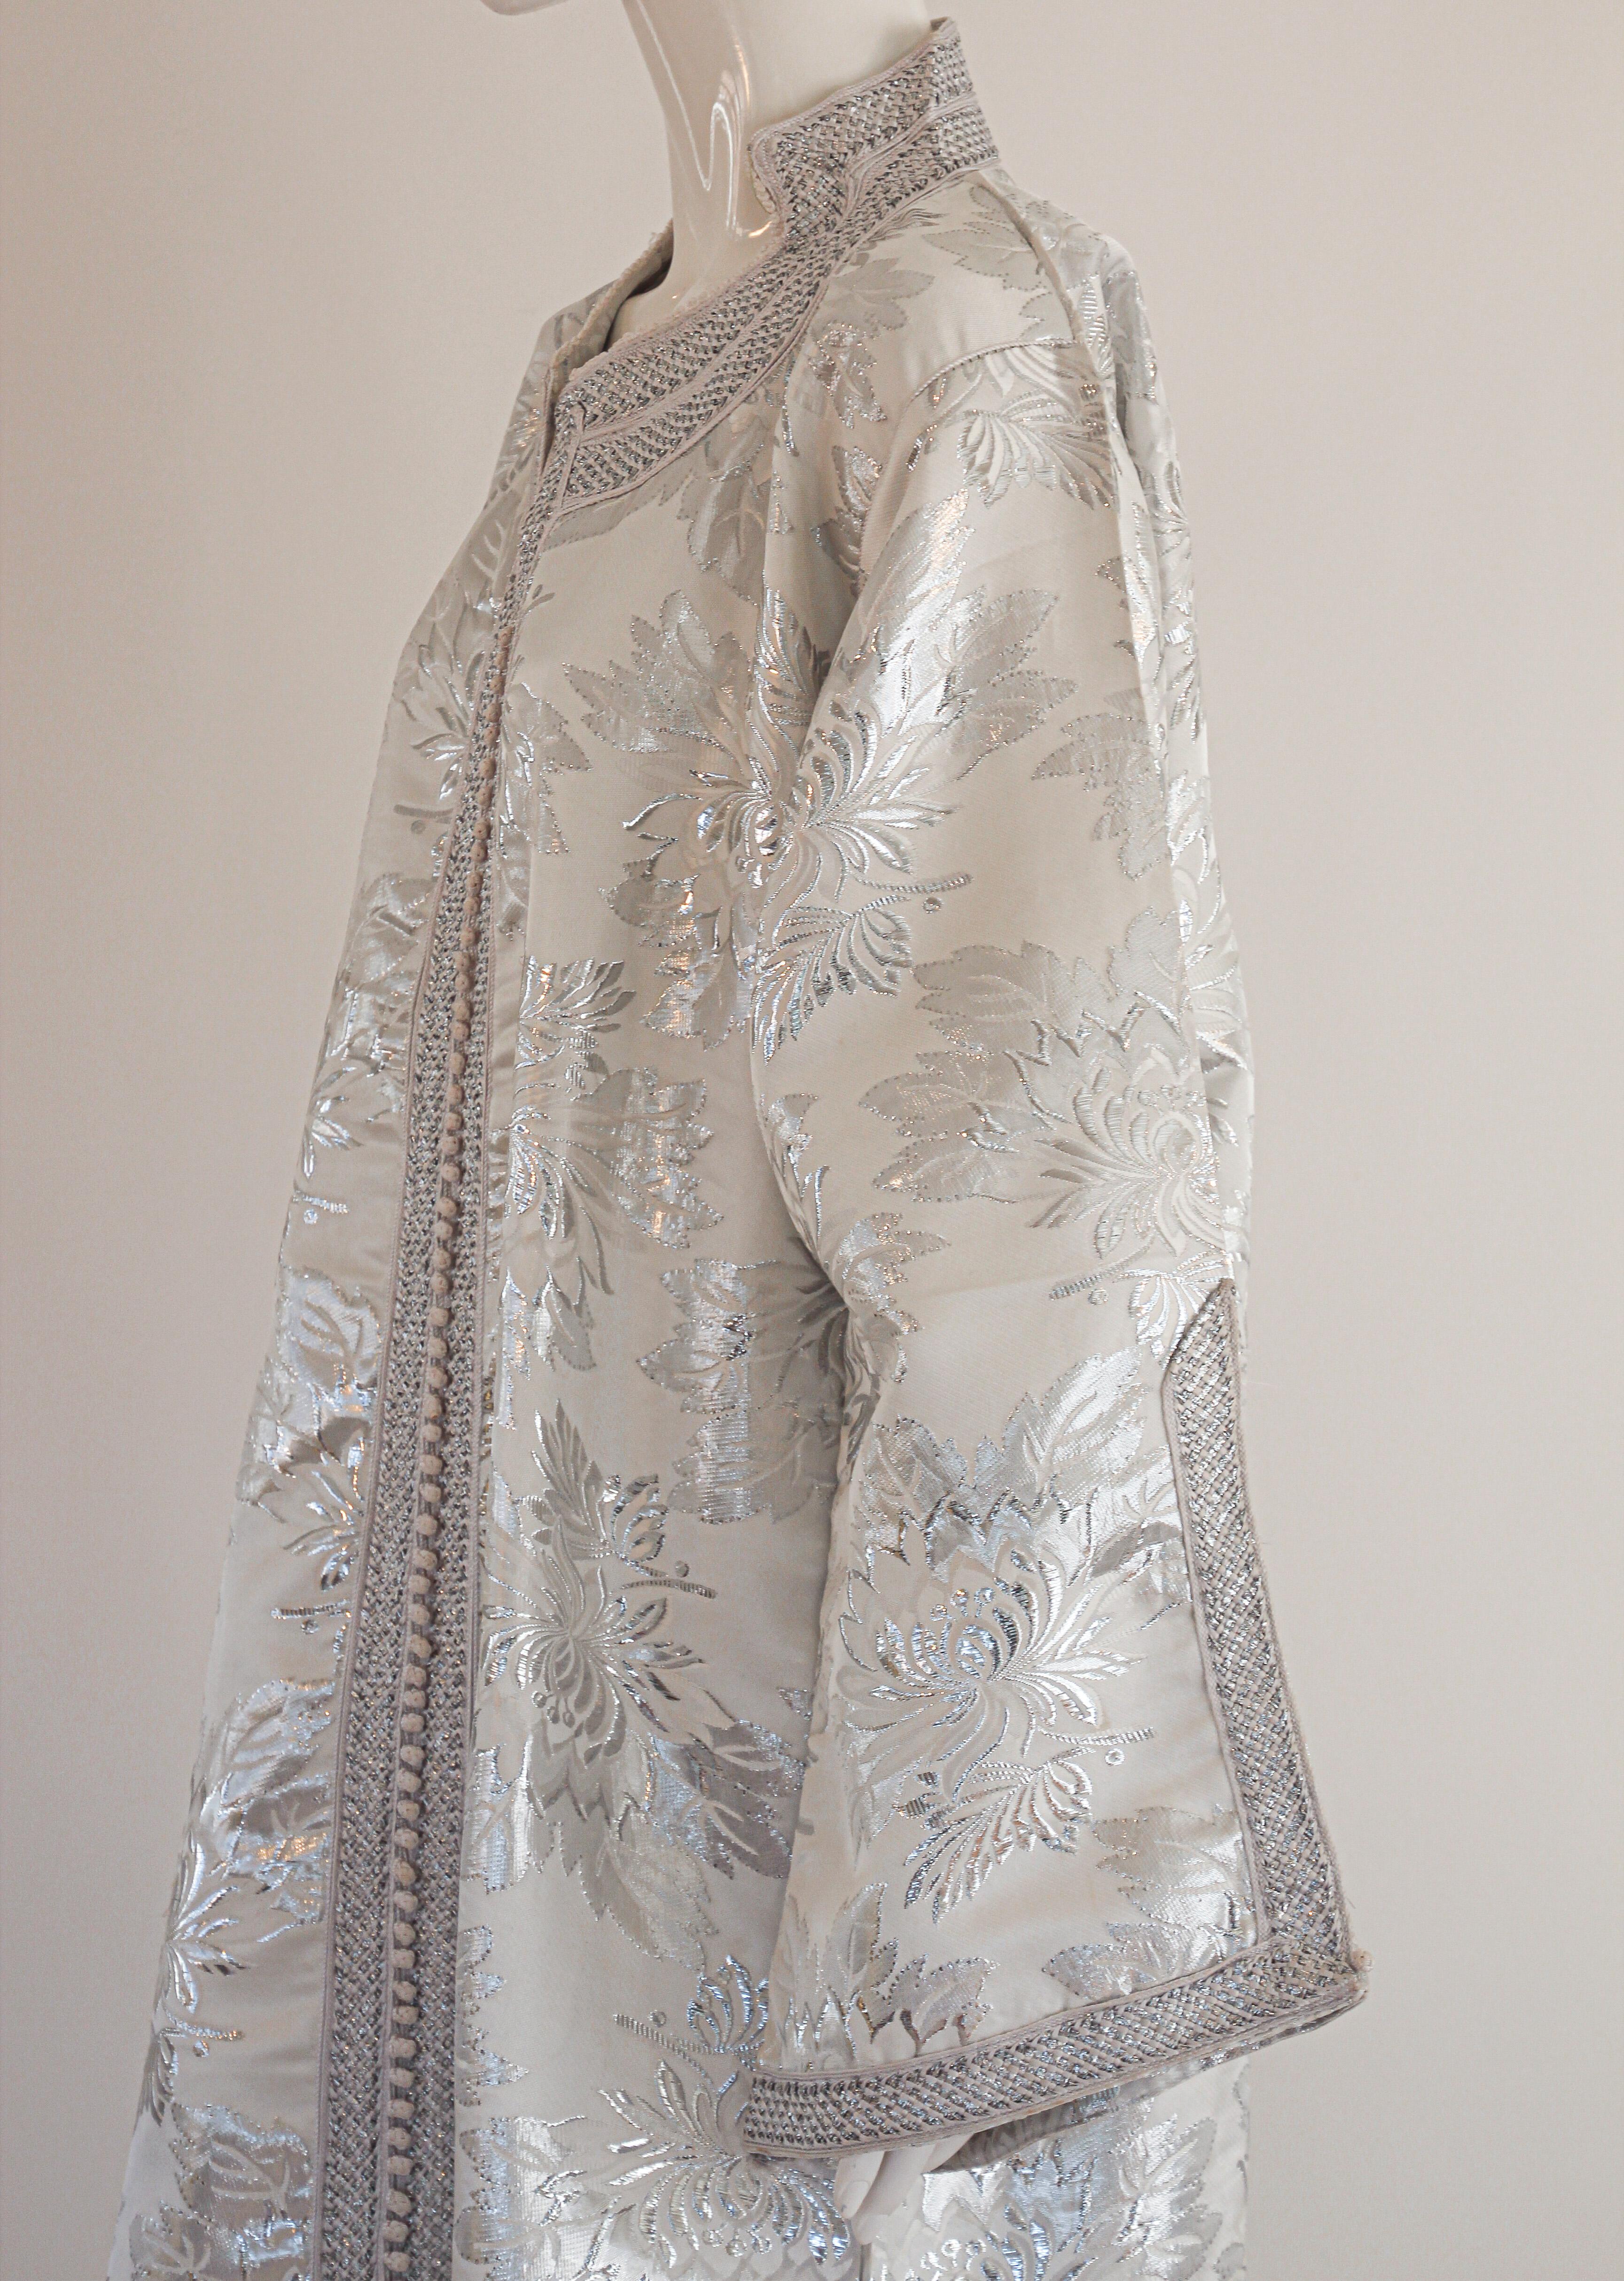 Moroccan Caftan Silver Damask Embroidered, Vintage, 1960s 10